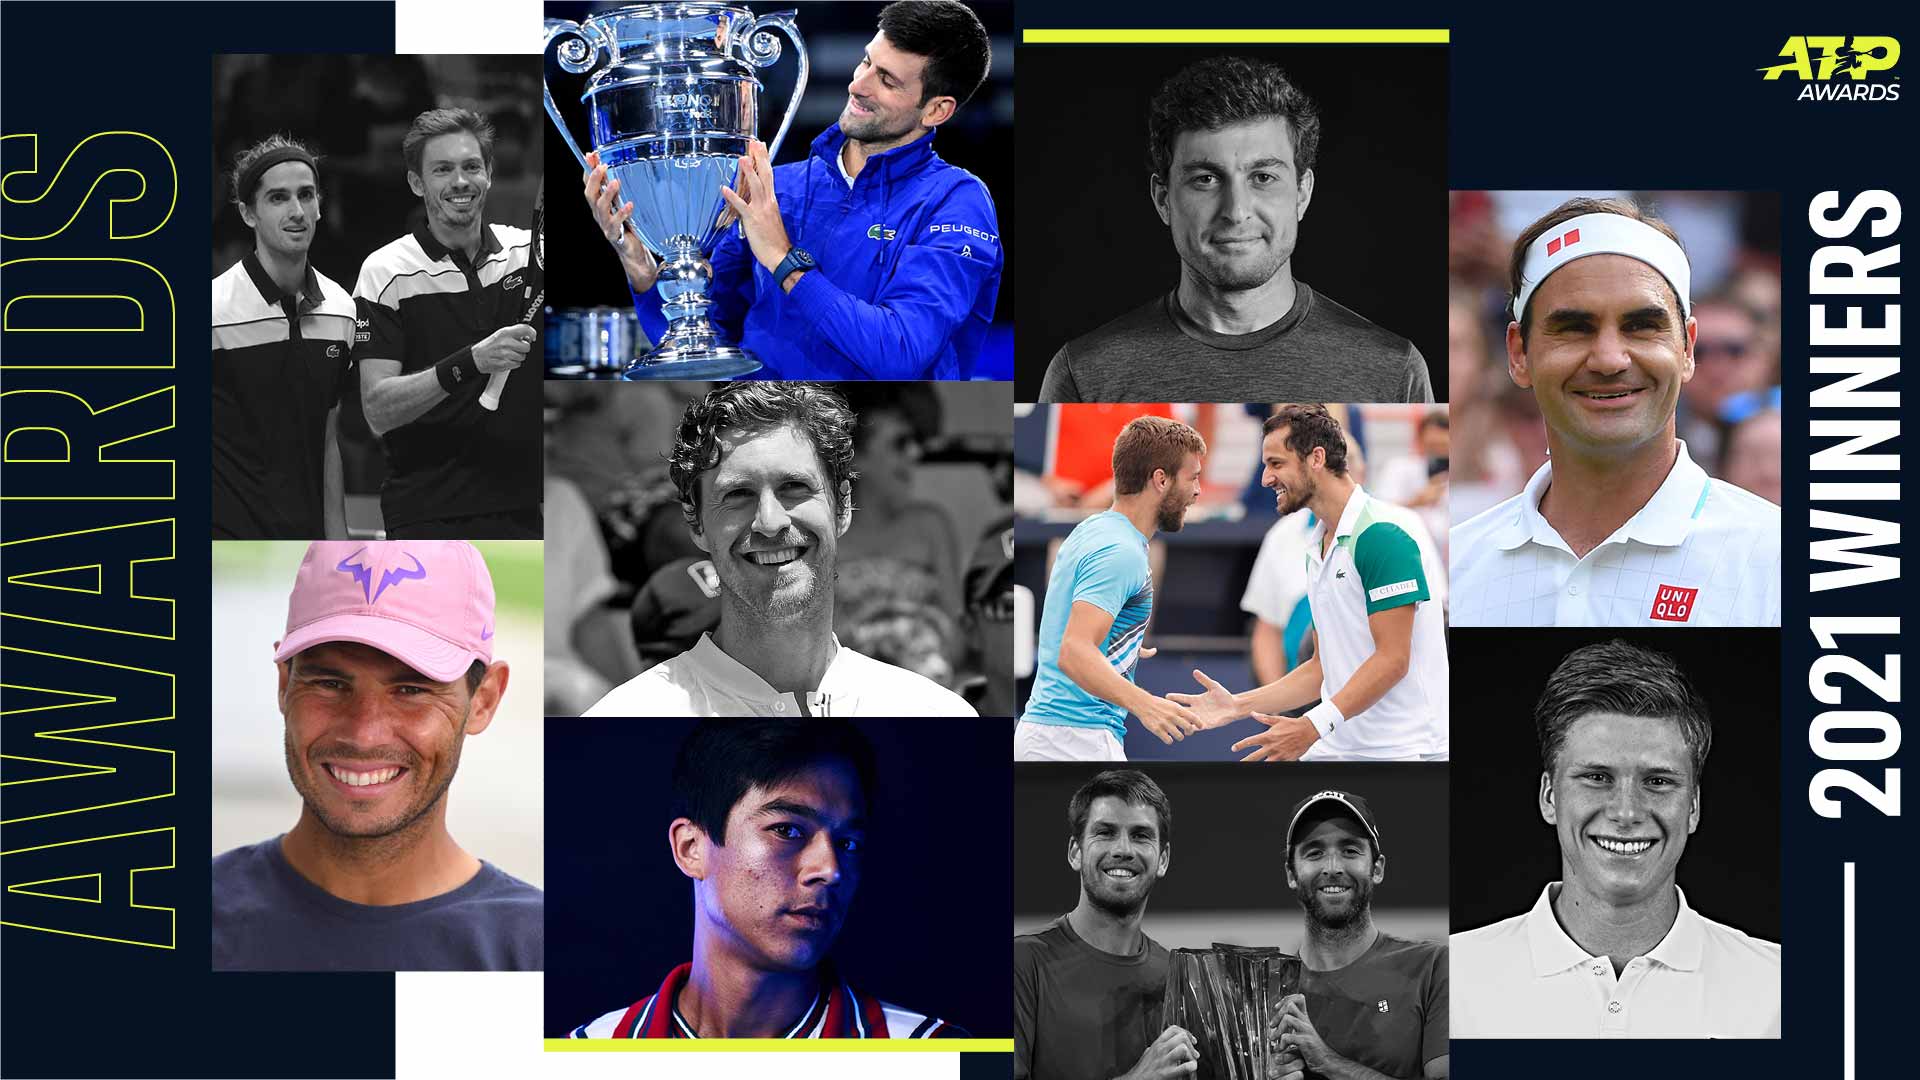 ATP Tour - The winners for Tournaments of the year in the 2021 #ATPAwards  are Indian Wells, Doha and Vienna 🙌 ➡️